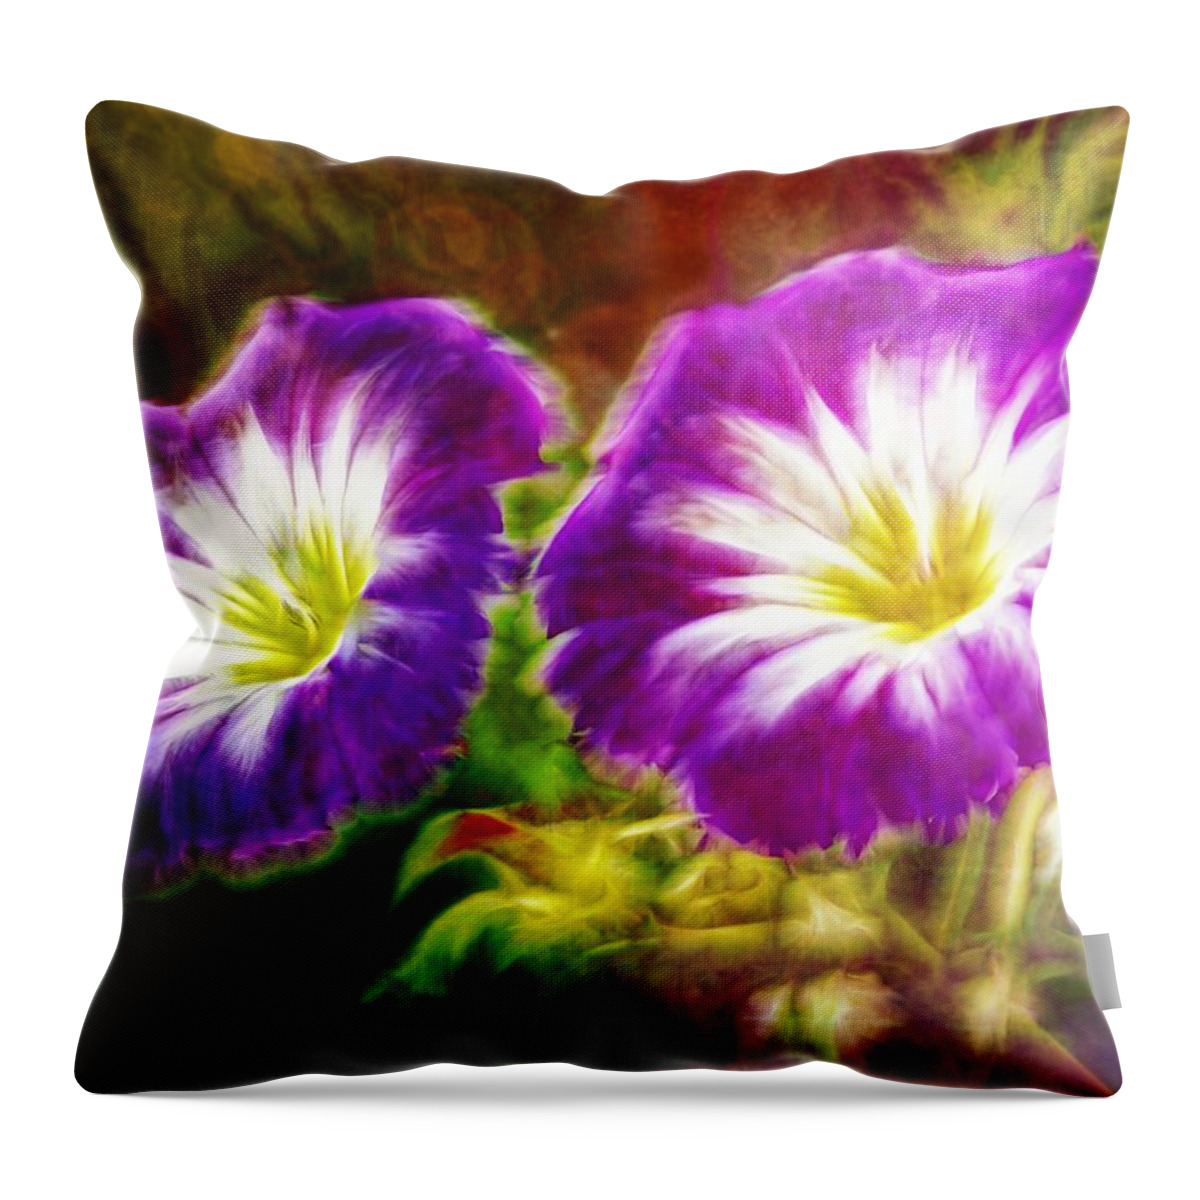 Flowers Throw Pillow featuring the digital art Two eyes of Heaven by Lilia D